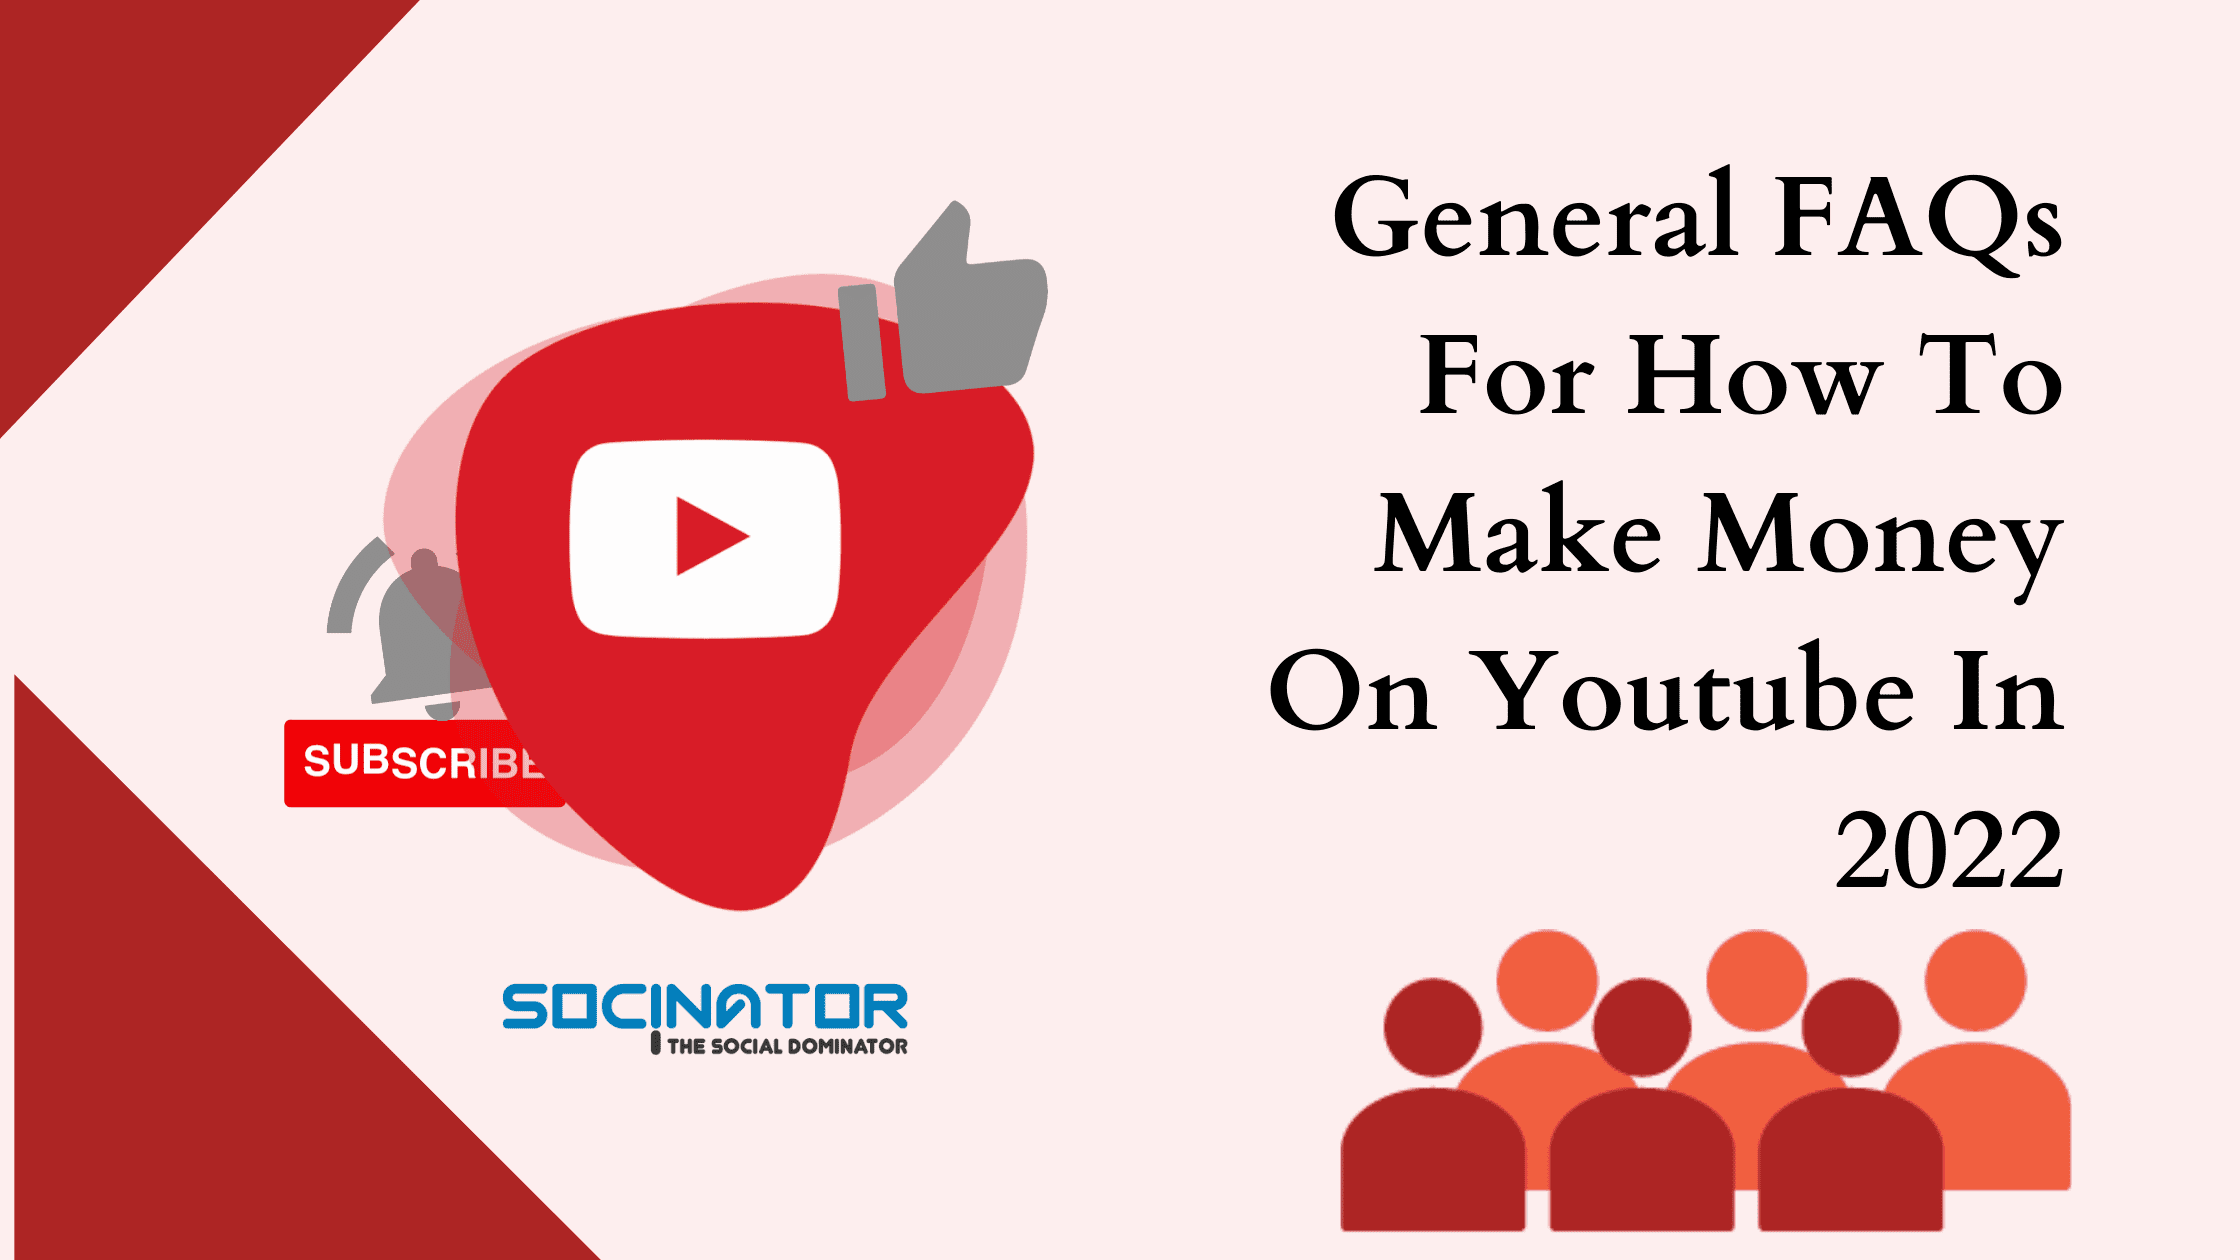 General FAQs For How To Make Money On YouTube In 2022